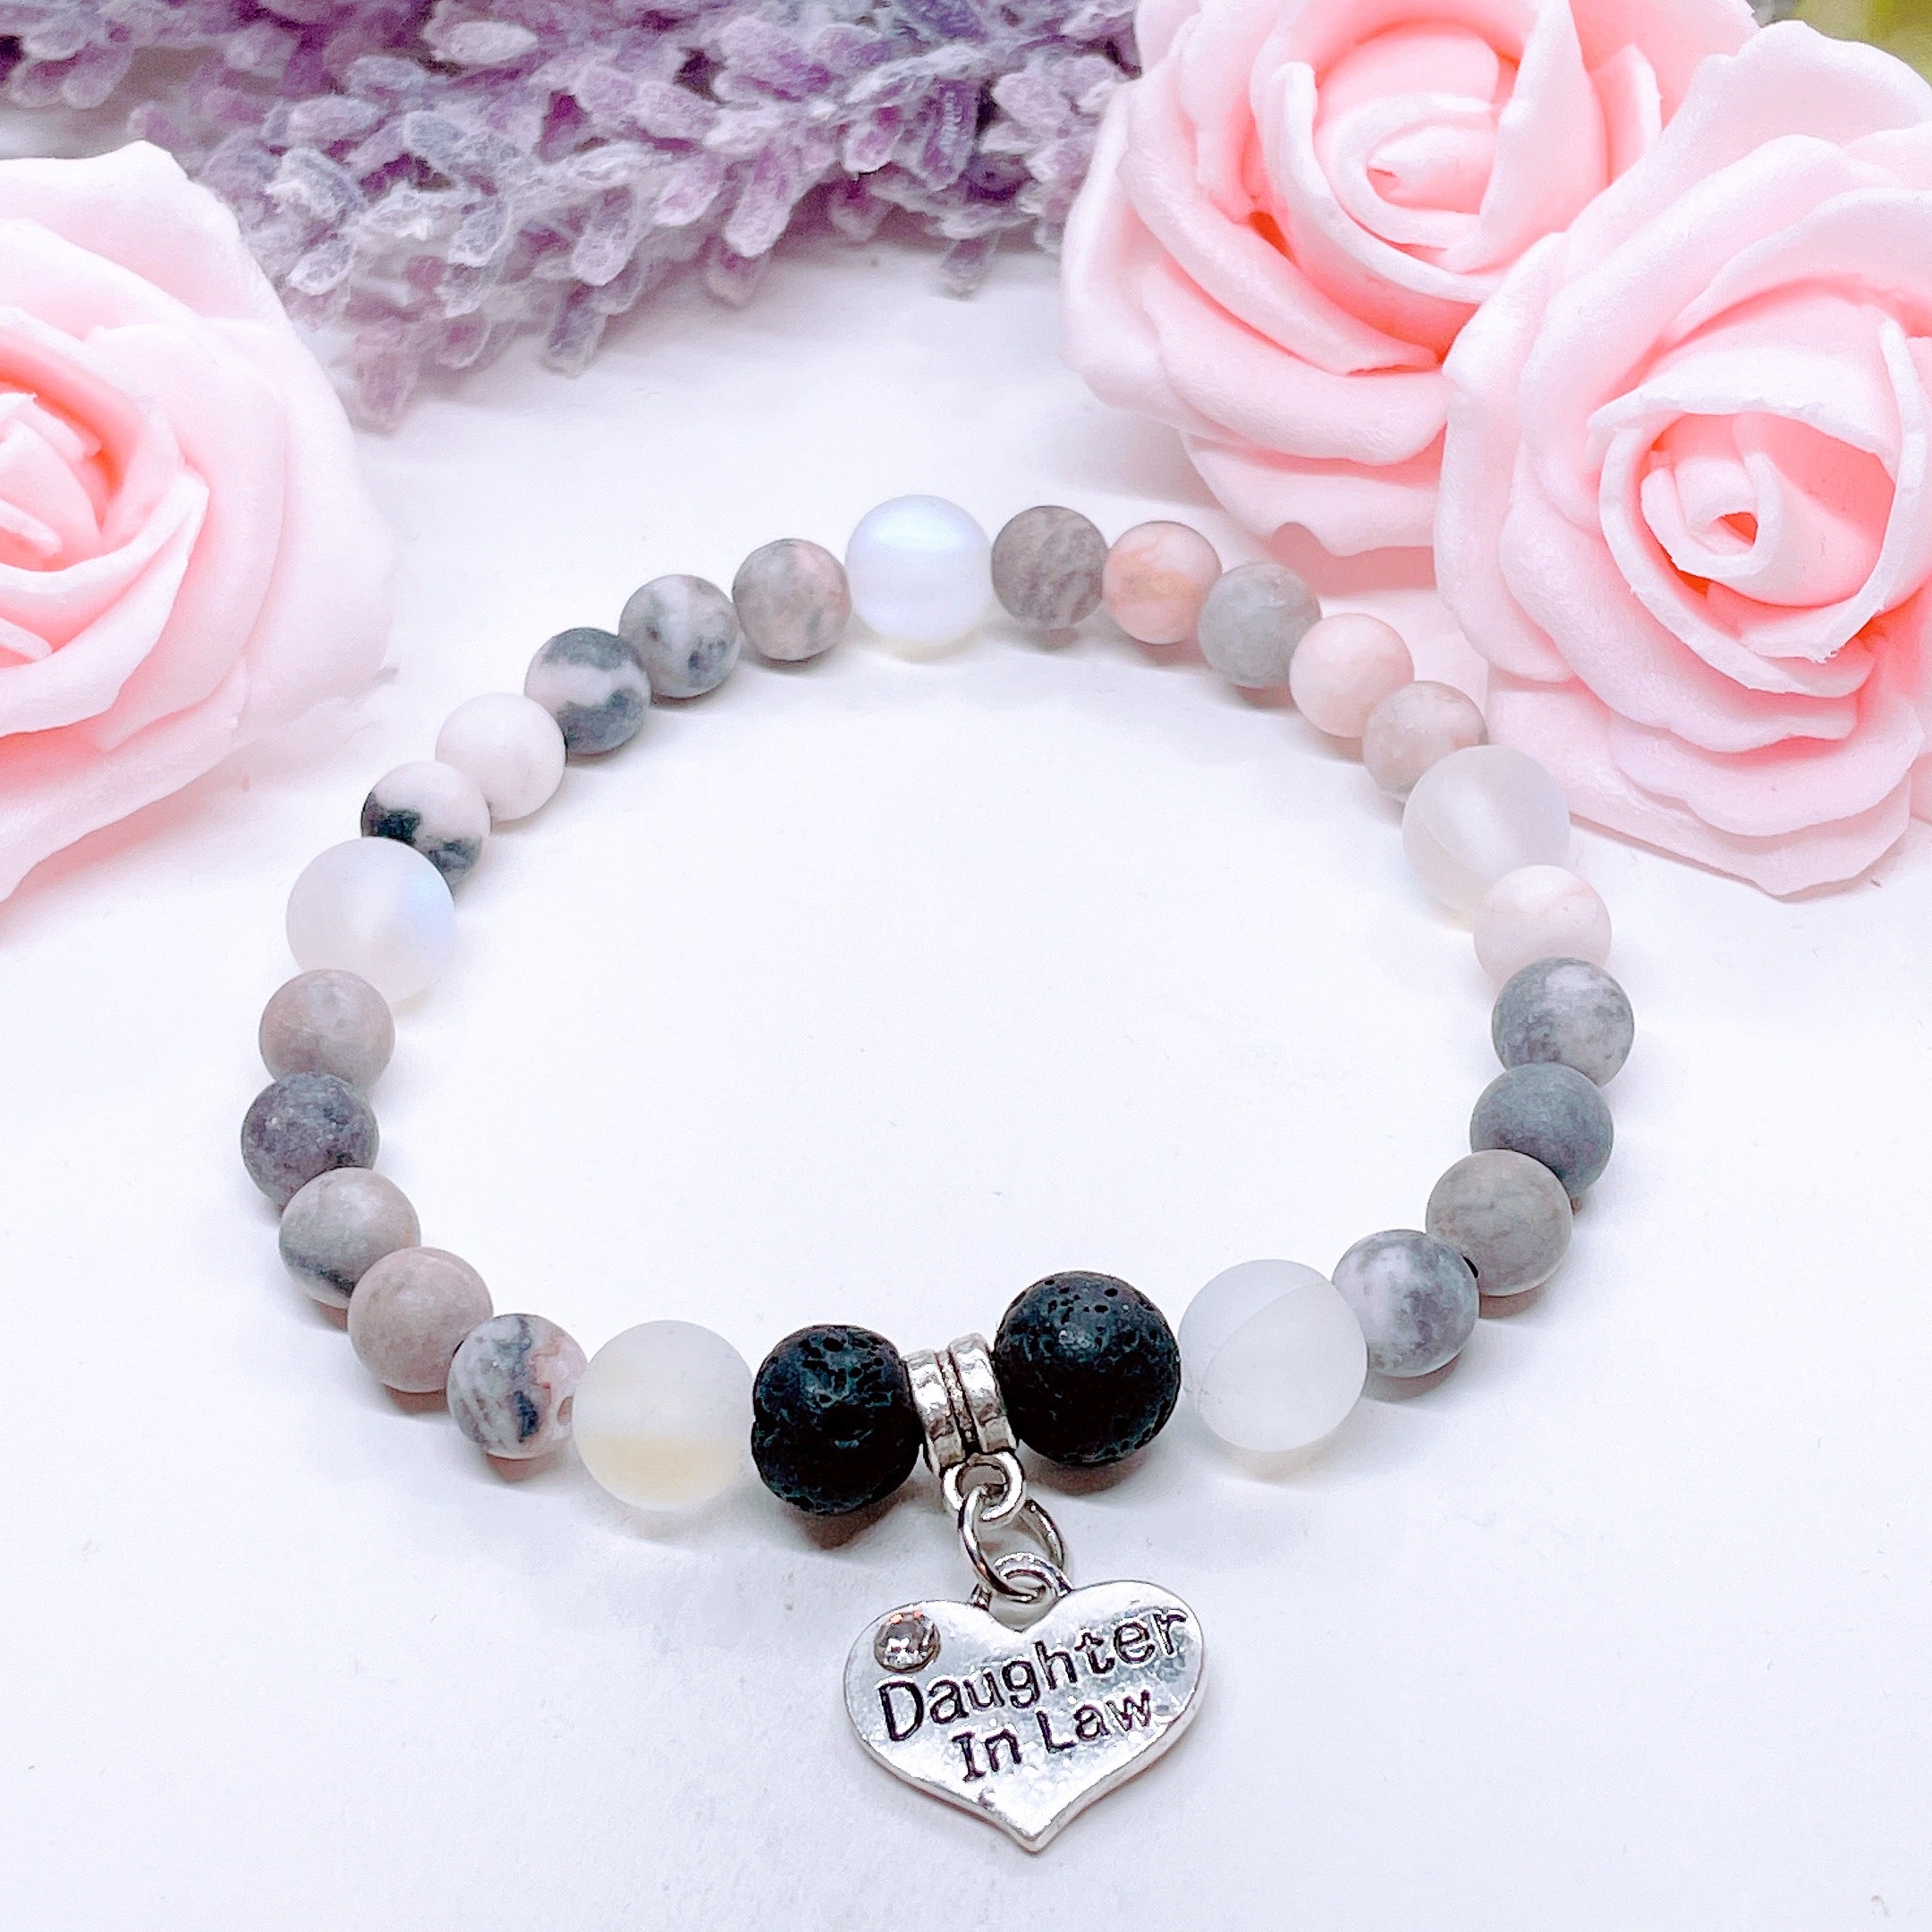 Daughter In Law Heart Companion Charm Bracelet